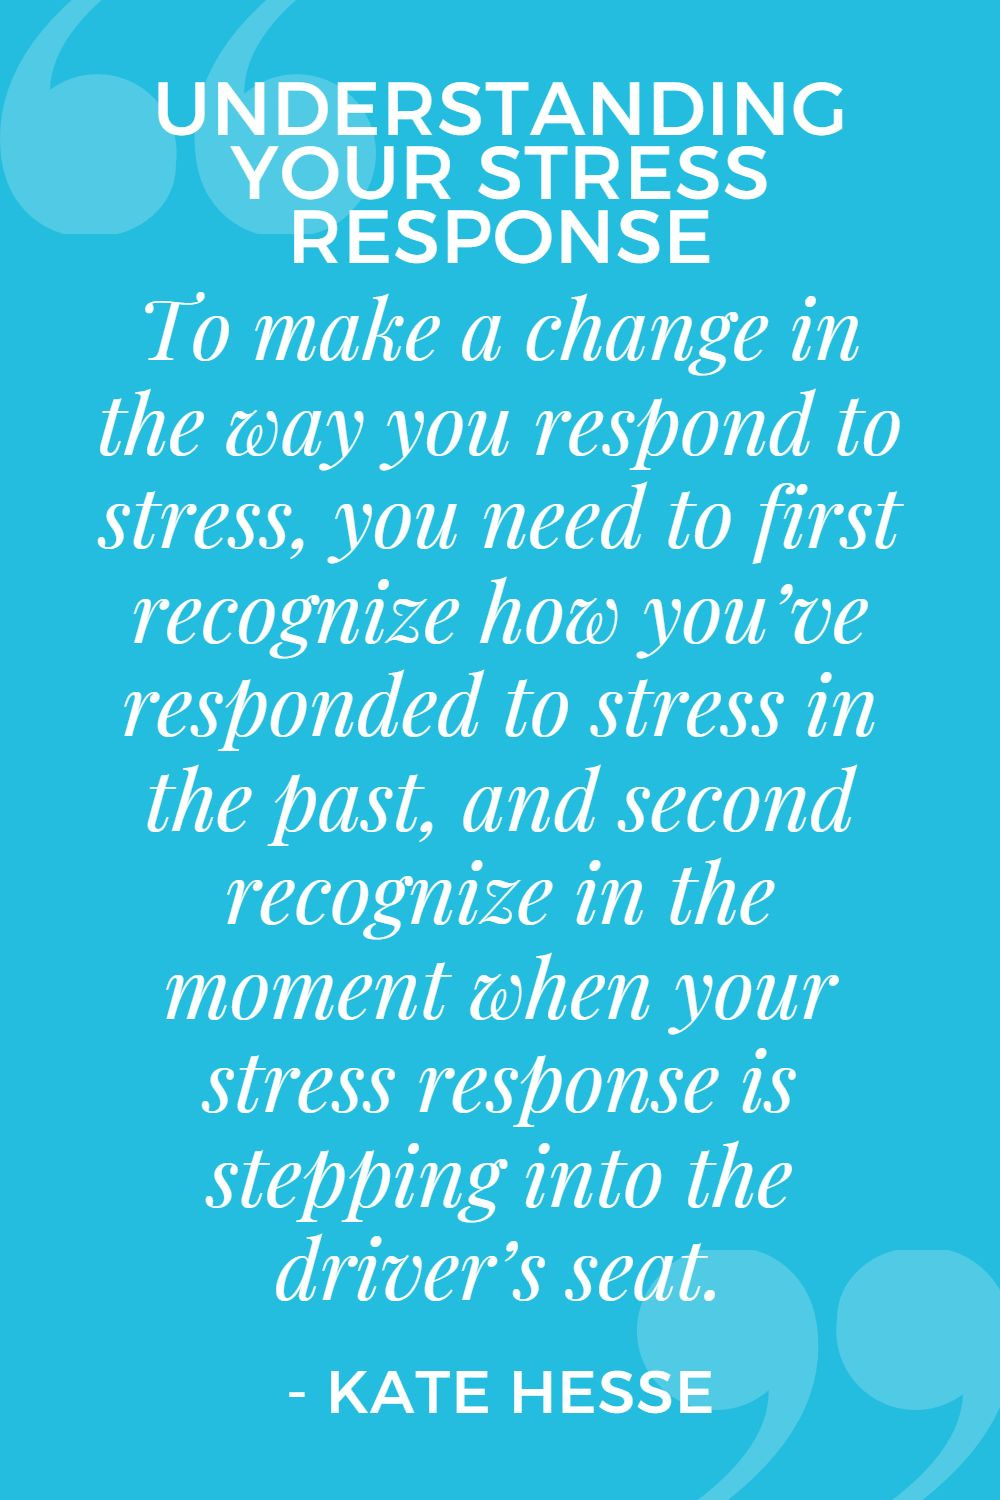 To make a change in the way you respond to stress, you need to first recognize how you've responded to stress in the past, and second recognize in the moment when your stress response is stepping into the driver's seat.